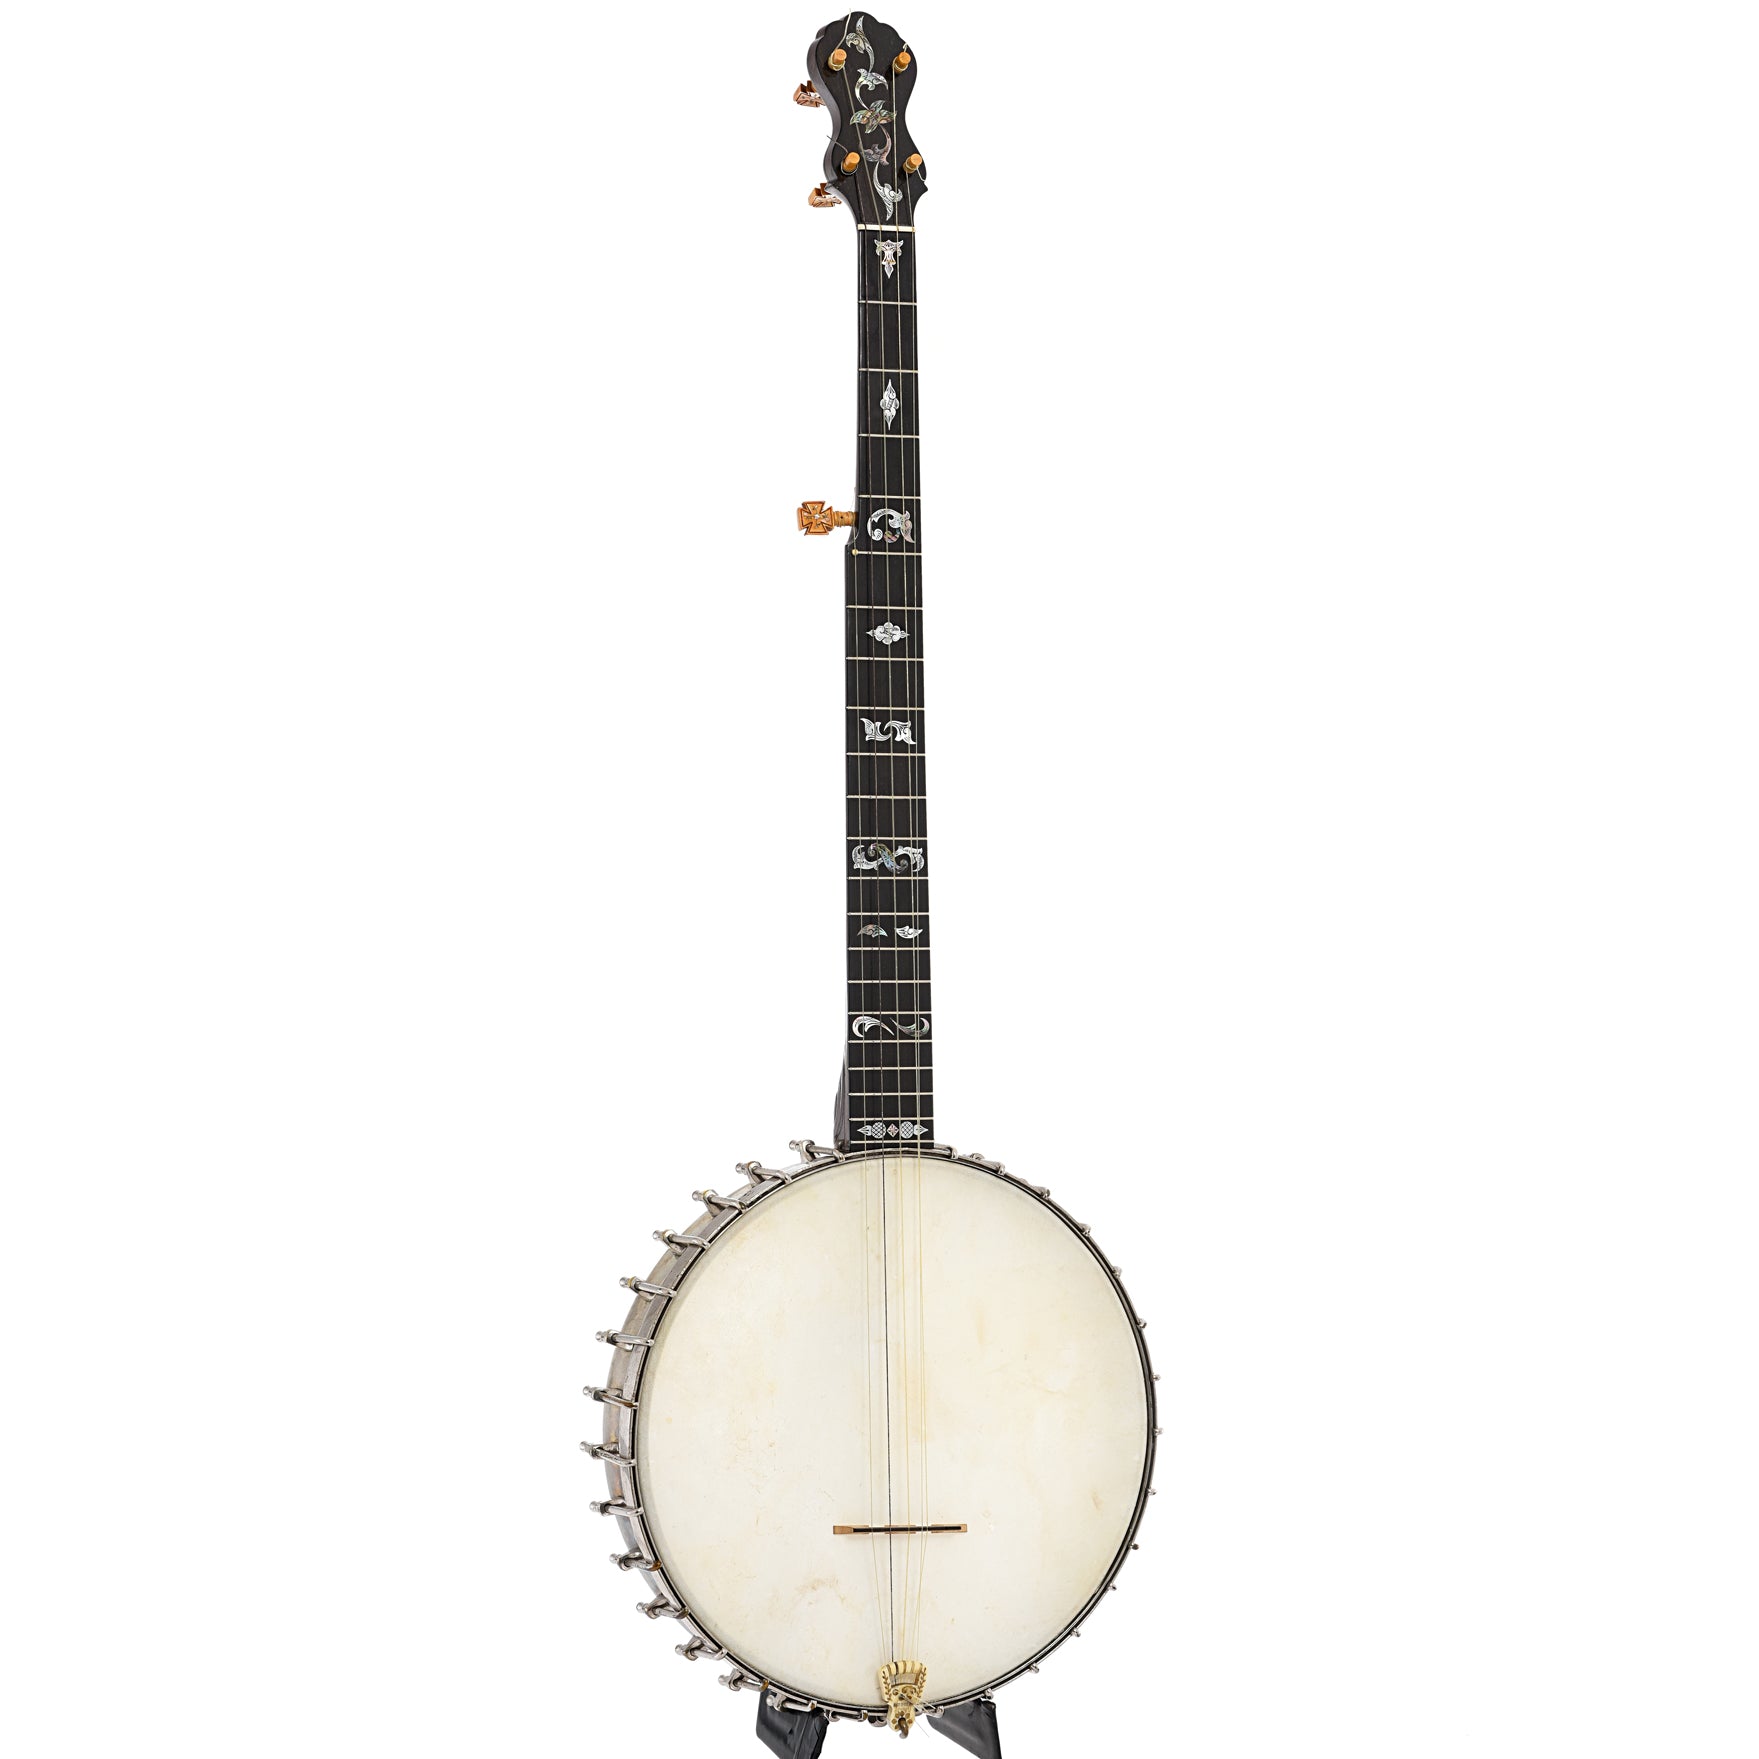 Full front and side of A.C. Fairbanks Electric #3 Openback Banjo (c.1892-93)